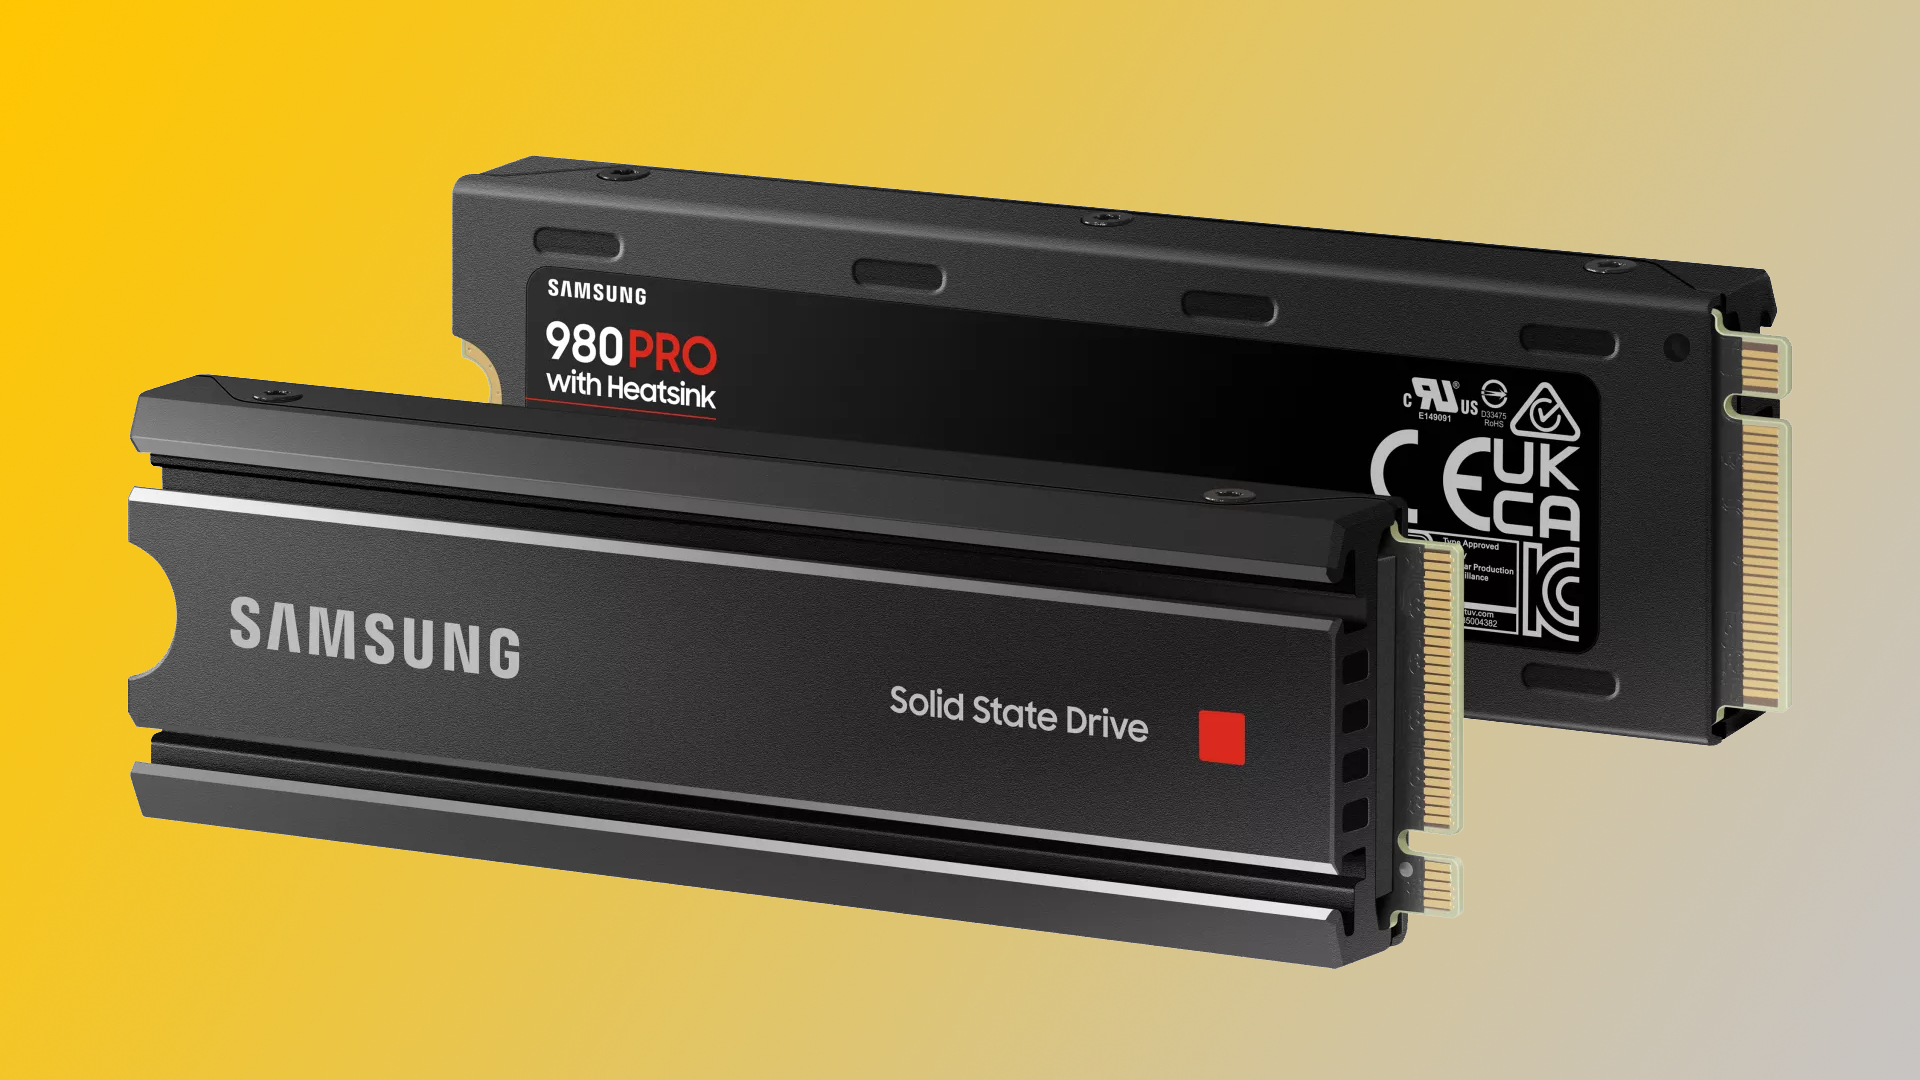 PS5 Black Friday Upgrade: 2TB Samsung 980 Pro SSD for $189 | Tom's 